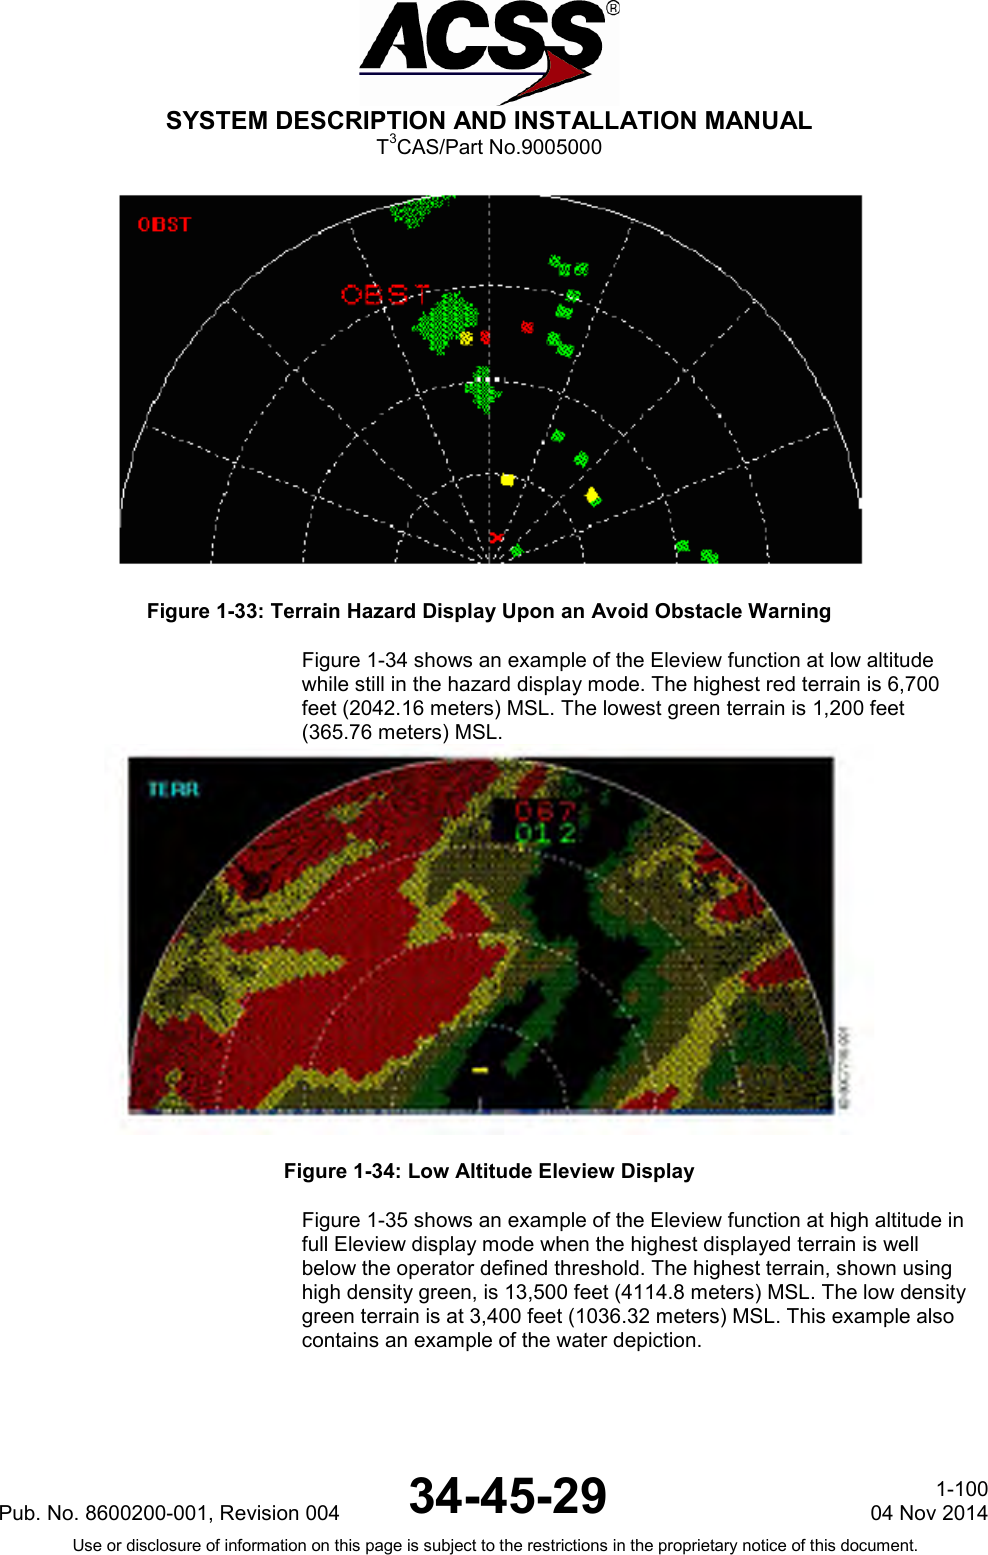  SYSTEM DESCRIPTION AND INSTALLATION MANUAL T3CAS/Part No.9005000  Figure 1-33: Terrain Hazard Display Upon an Avoid Obstacle Warning Figure 1-34 shows an example of the Eleview function at low altitude while still in the hazard display mode. The highest red terrain is 6,700 feet (2042.16 meters) MSL. The lowest green terrain is 1,200 feet (365.76 meters) MSL.  Figure 1-34: Low Altitude Eleview Display Figure 1-35 shows an example of the Eleview function at high altitude in full Eleview display mode when the highest displayed terrain is well below the operator defined threshold. The highest terrain, shown using high density green, is 13,500 feet (4114.8 meters) MSL. The low density green terrain is at 3,400 feet (1036.32 meters) MSL. This example also contains an example of the water depiction. Pub. No. 8600200-001, Revision 004 34-45-29 1-100 04 Nov 2014 Use or disclosure of information on this page is subject to the restrictions in the proprietary notice of this document.  